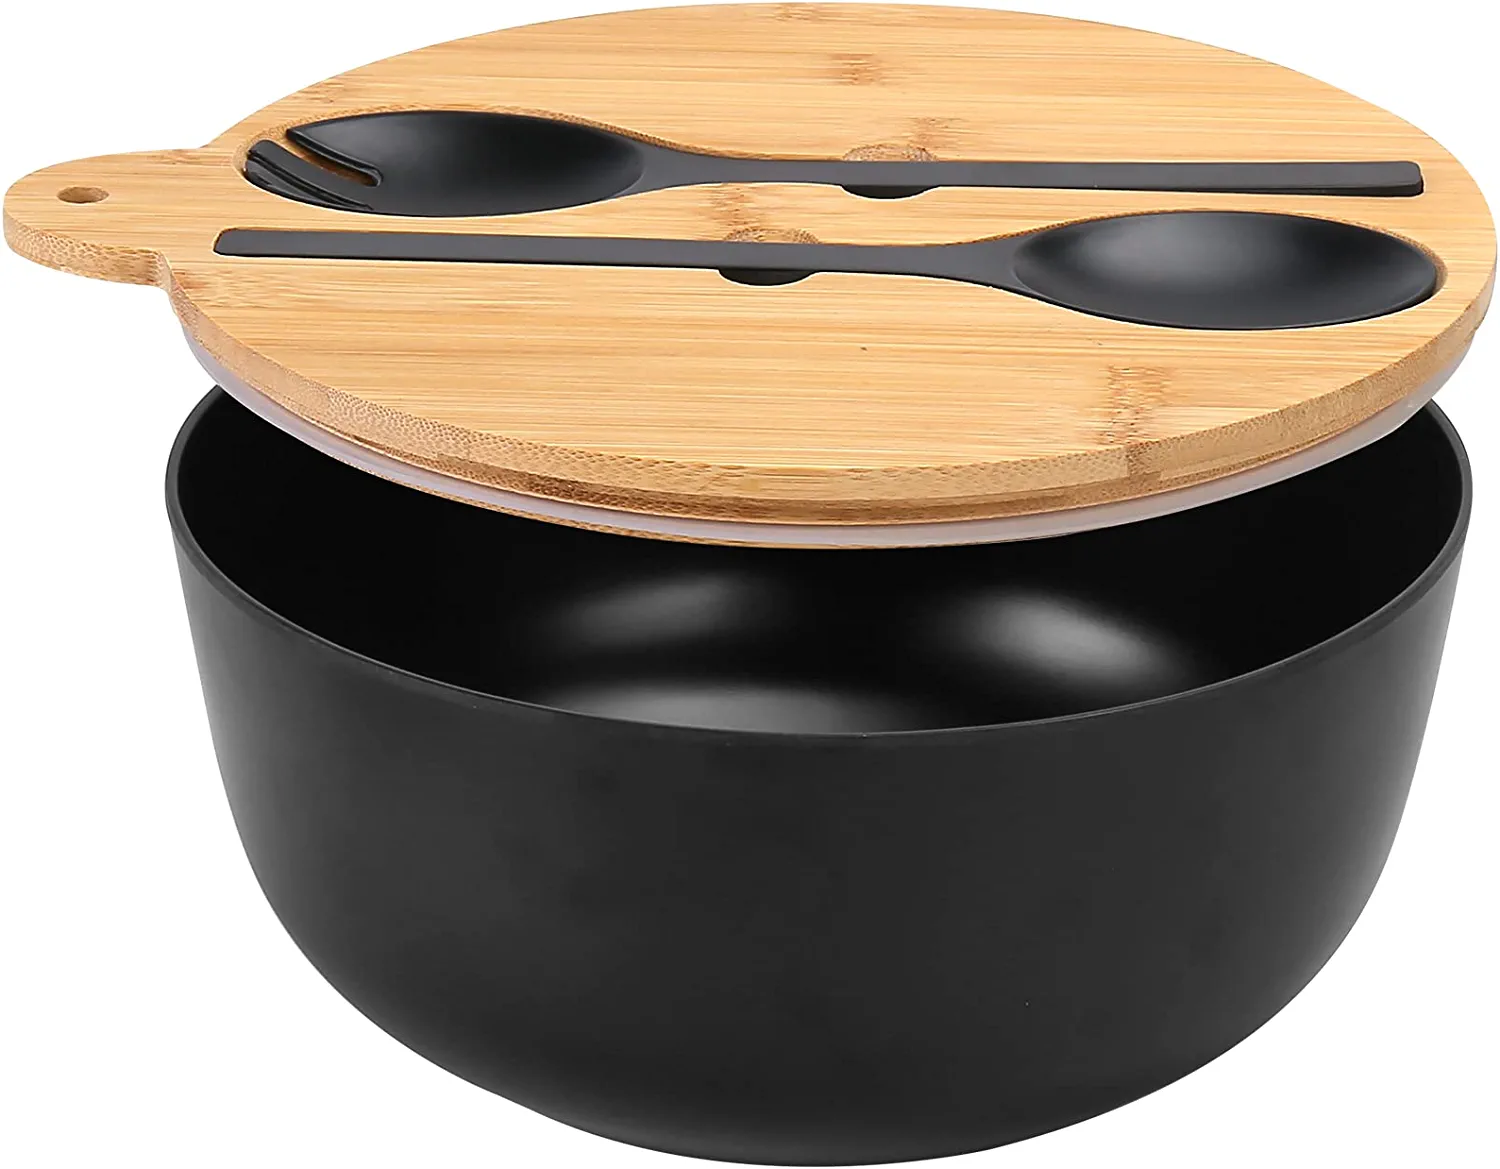 Buy Wholesale China High Quality Salad Bowl With Lid, 9.8inches Black Large  Salad Serving Bowl Set With Utensils, Bamboo Wooden Salad Bowl With Handle  & Black Large Salad Serving Bowl Set With